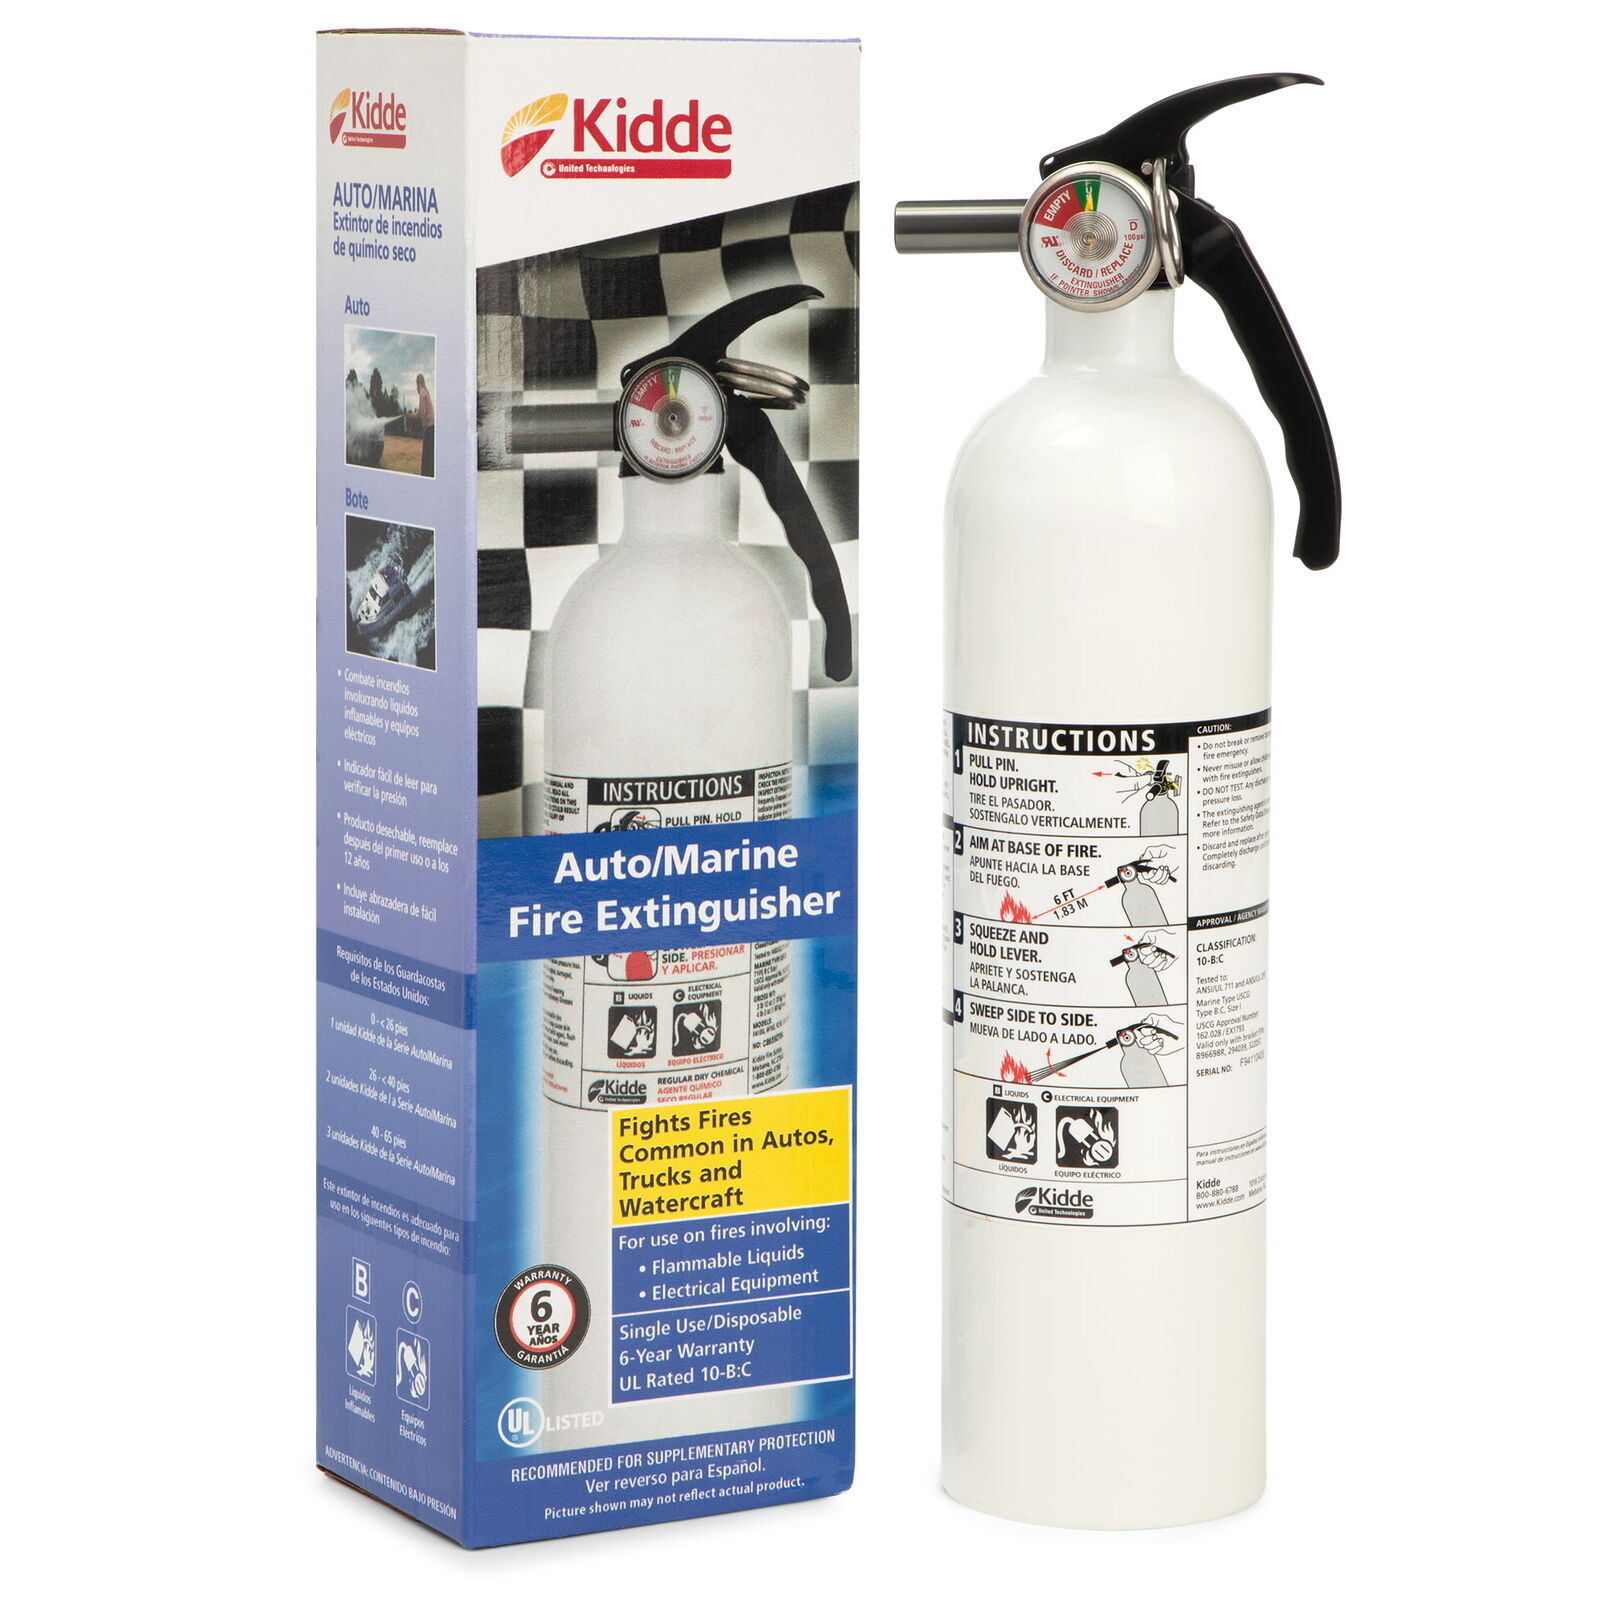 Auto/Marine UL Listed Fire Extinguisher, 10-B:C Rated new